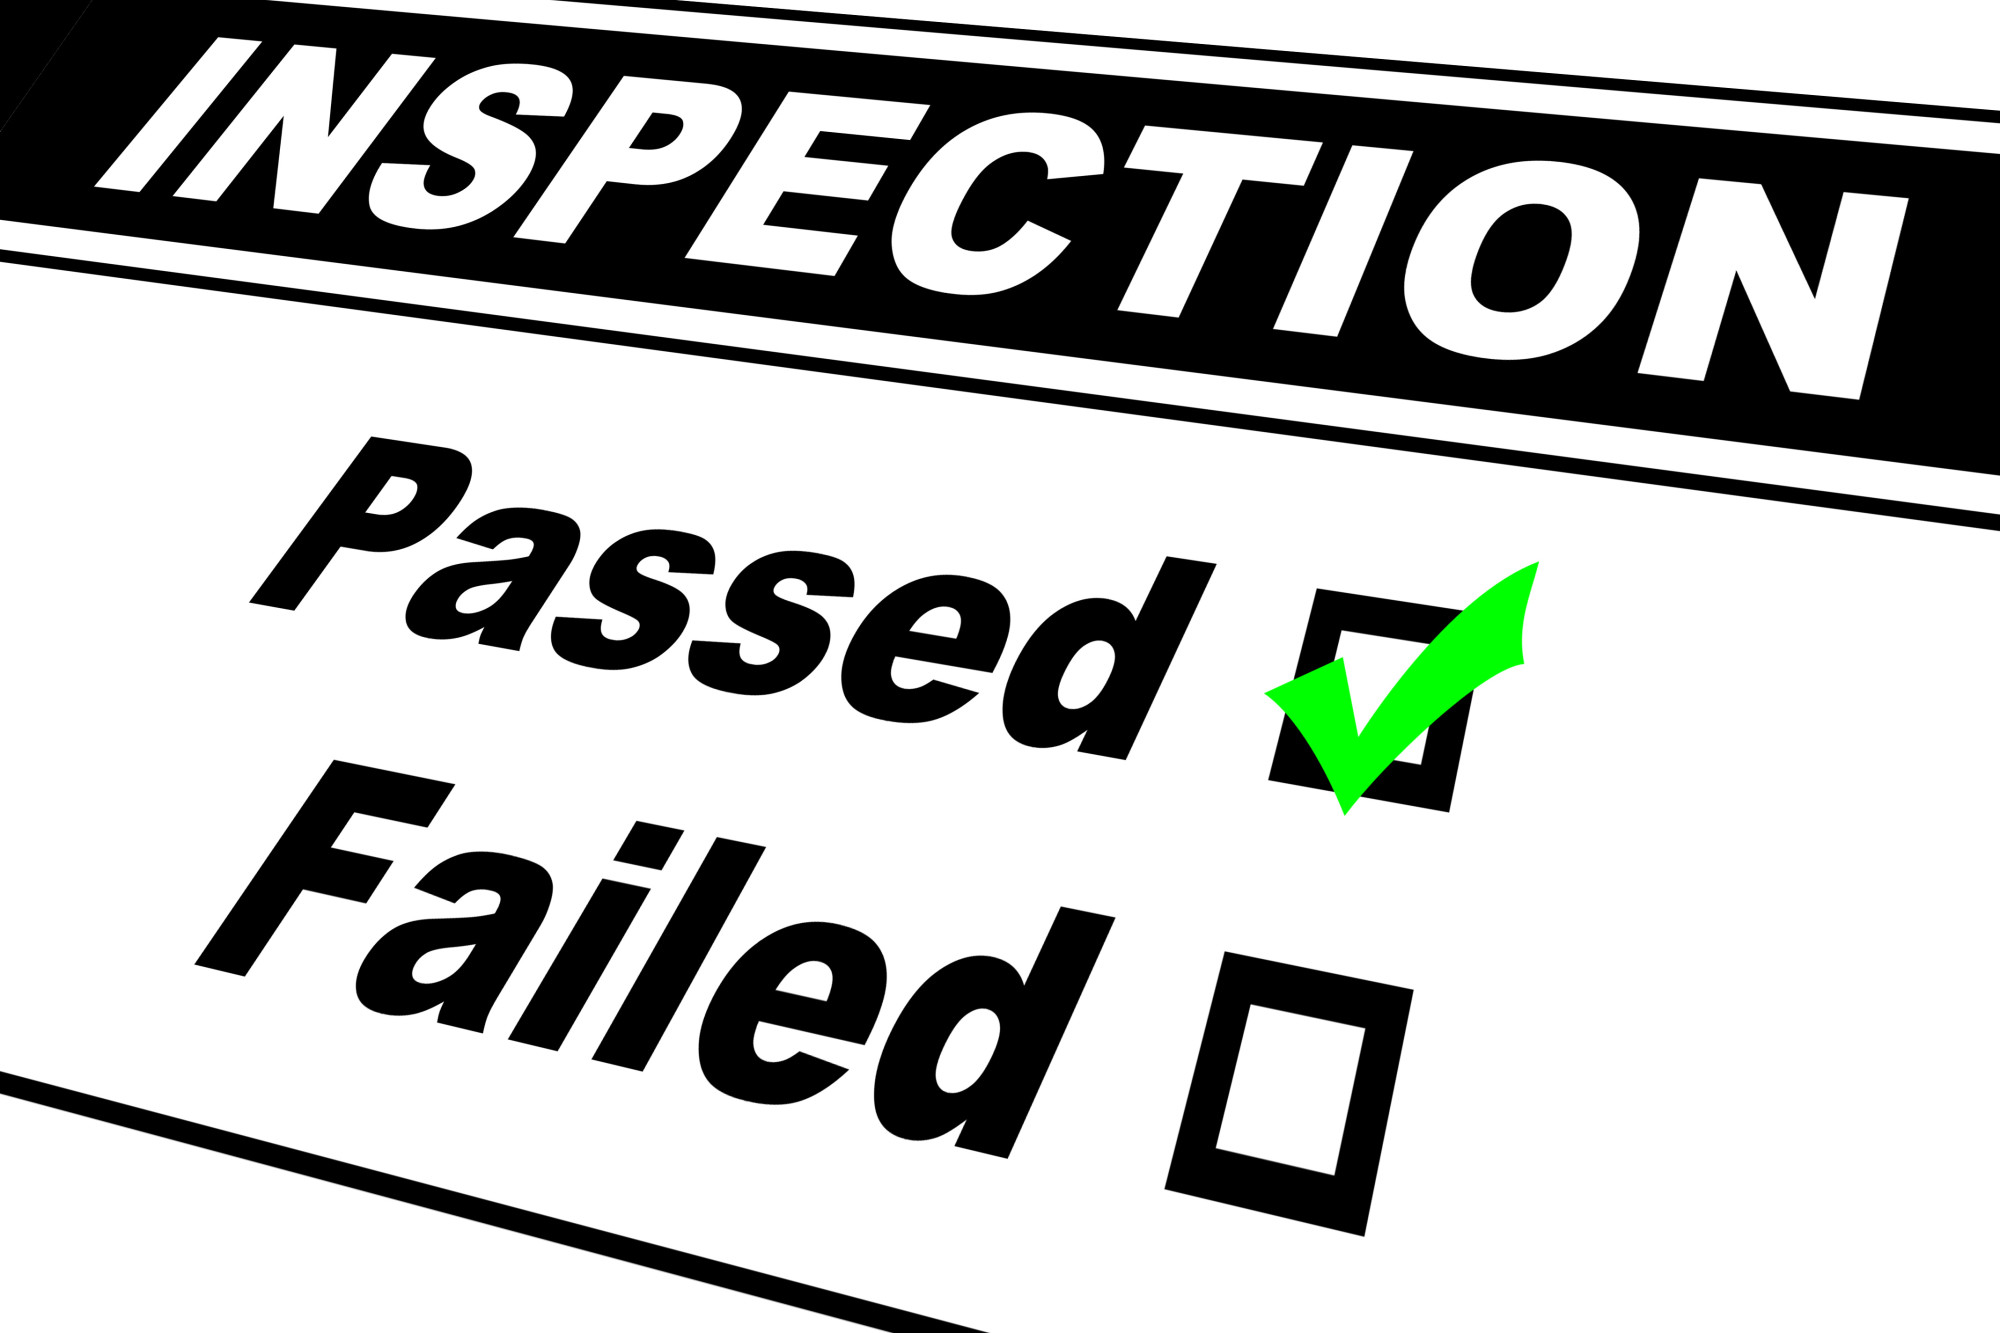 inspection with passed checkmarked